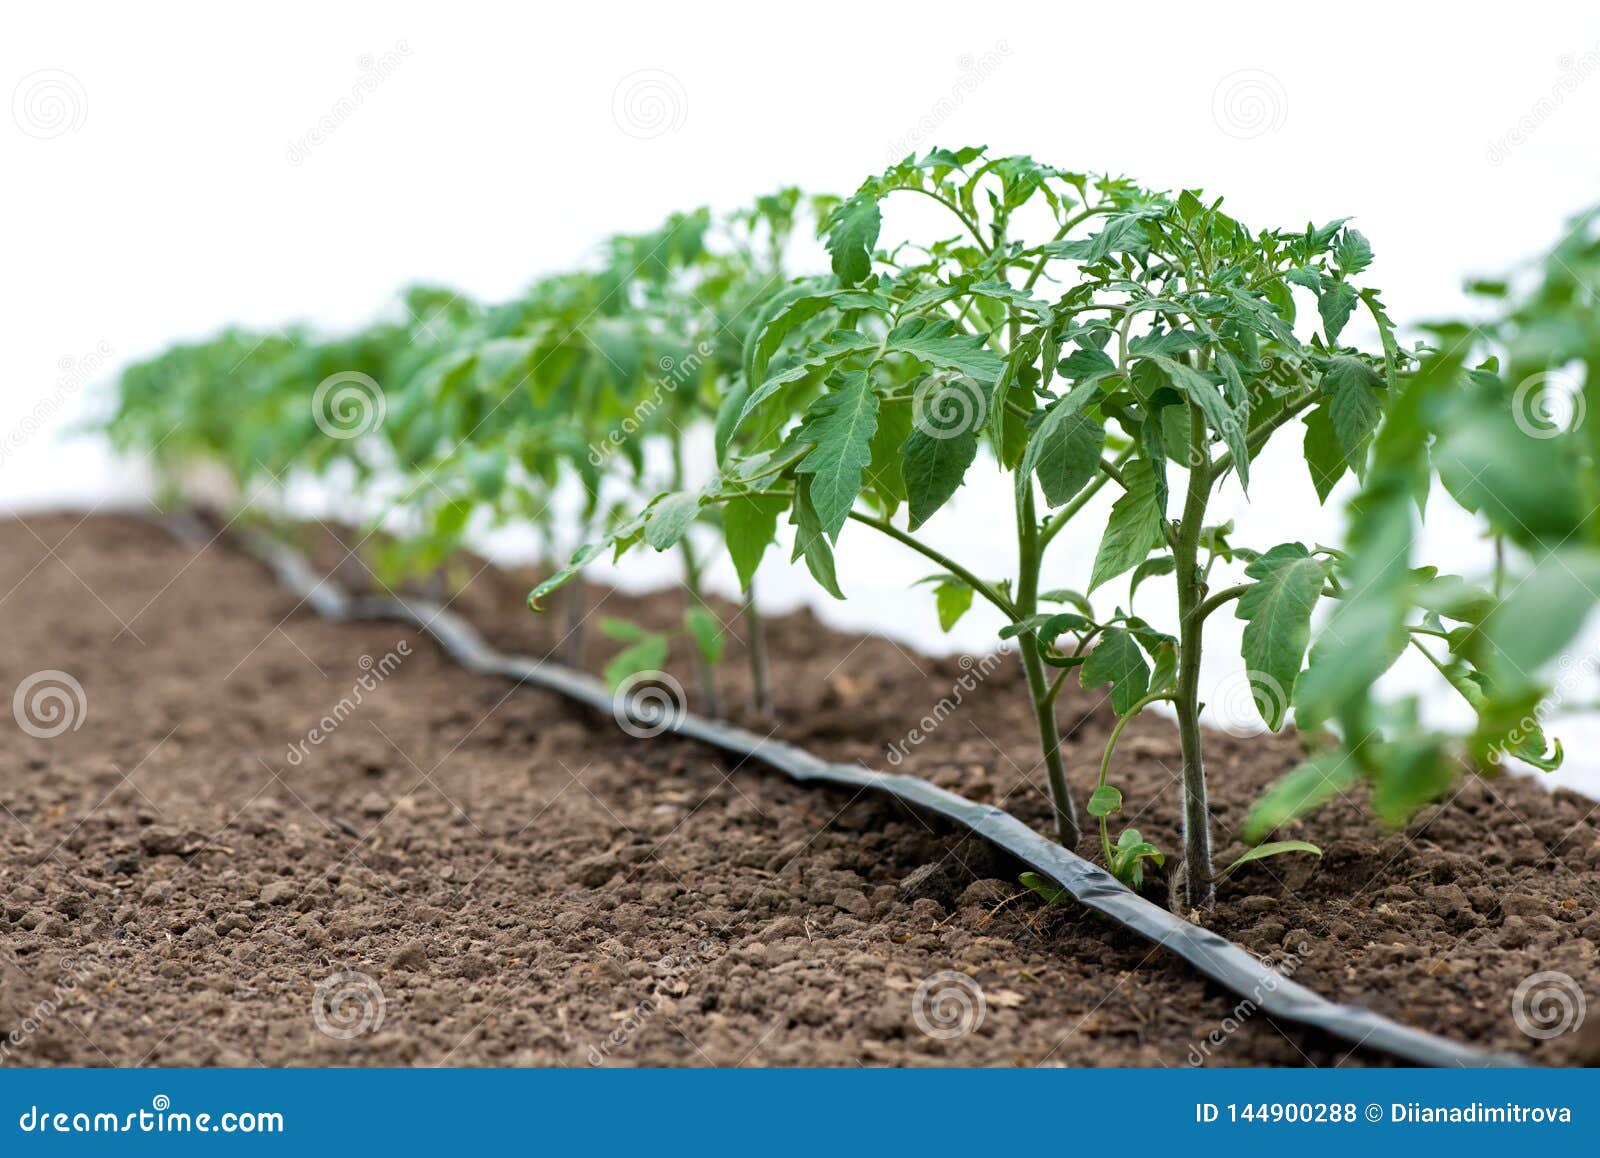 tomato plants in a greenhouse and drip irrigation sistem